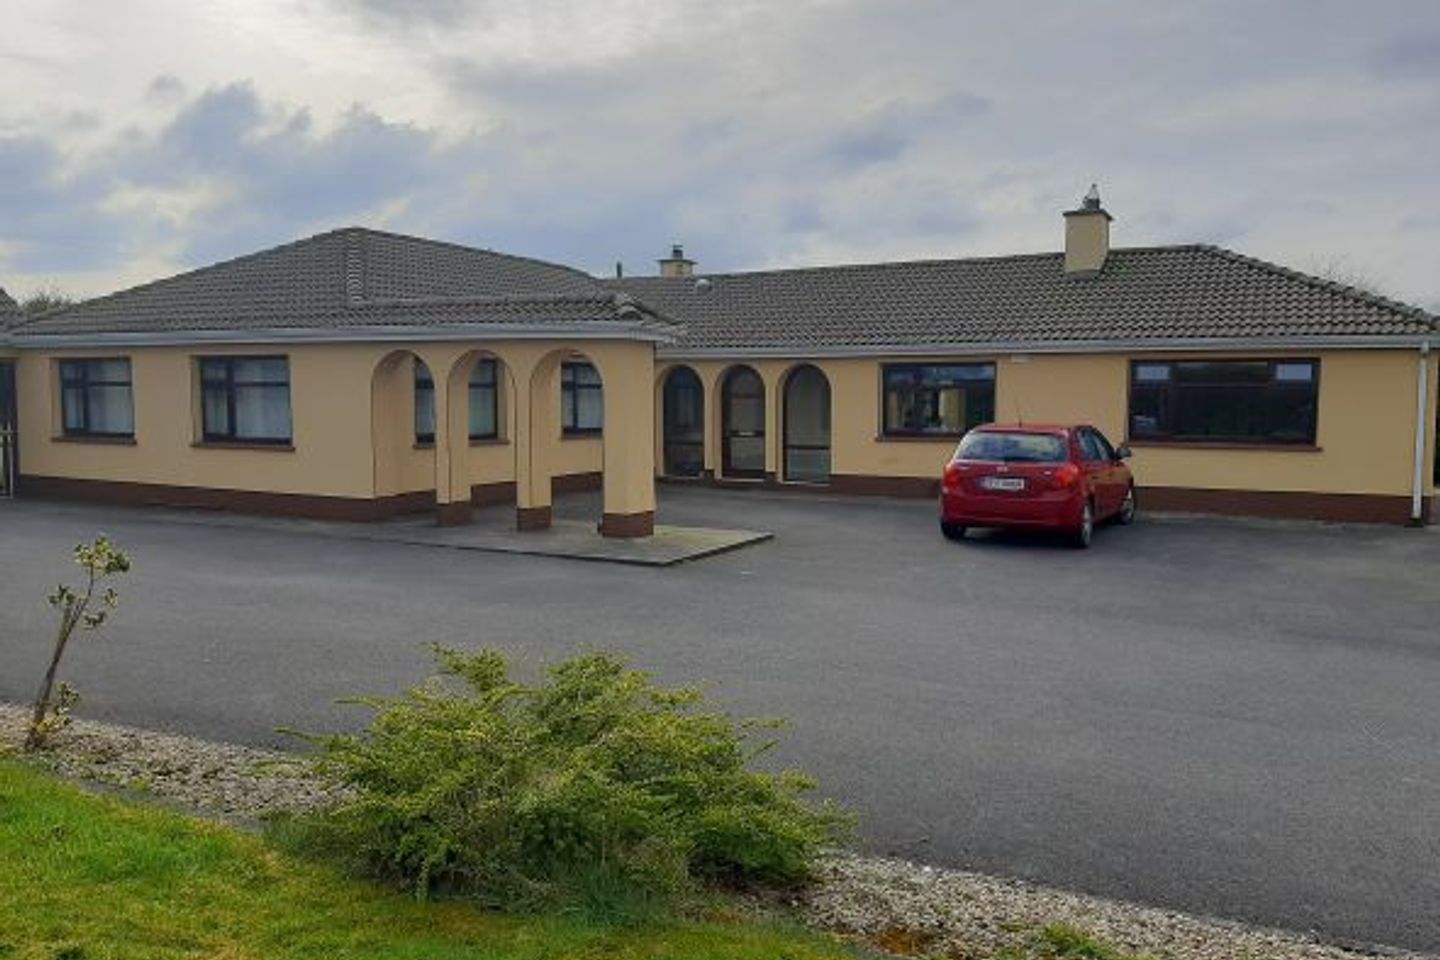 Bellacagher Lodge, Bellacagher, Ballintubber, Co. Roscommon, F45XE84